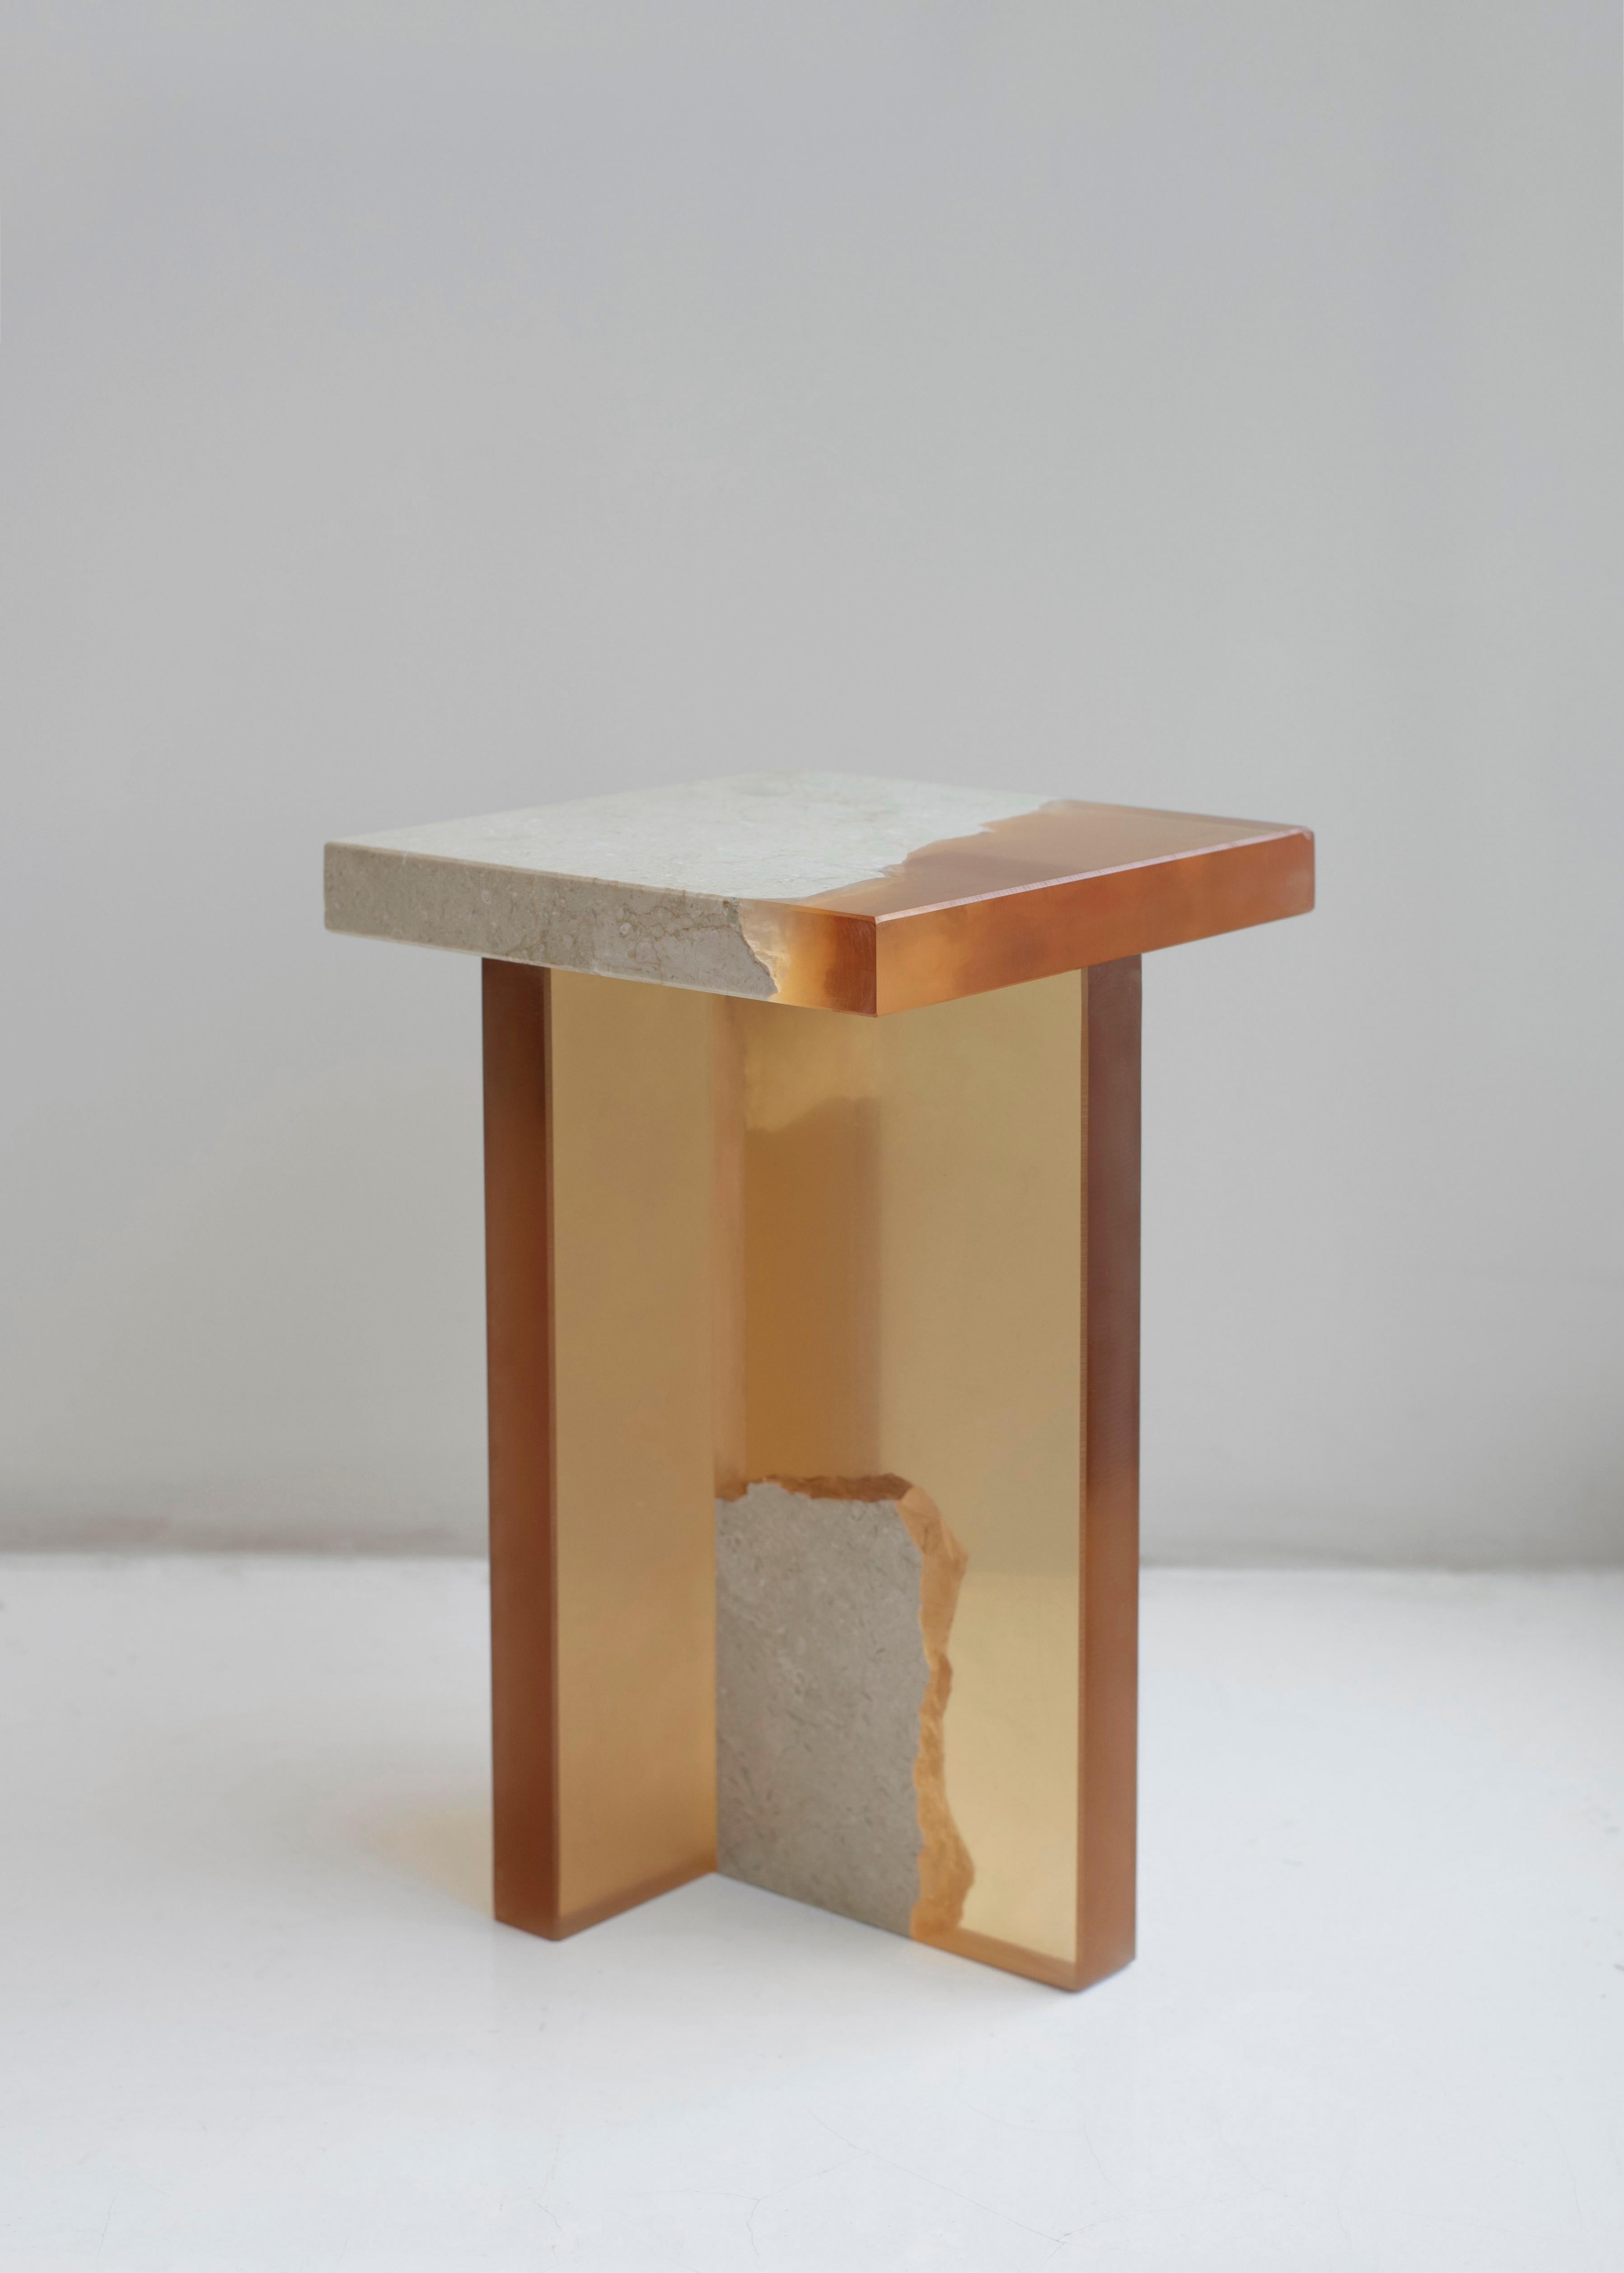 Crystal marble fragment side table by Jang Hea Kyoung.
Artist: Jang Hea Kyoung
Materials: Crystal resin and marble
Dimensions: 28 x 28 x 46 cm
Can also be used a stool.

Jang Hea Kyoung is based in Seoul, Republic of Korea. She searches for